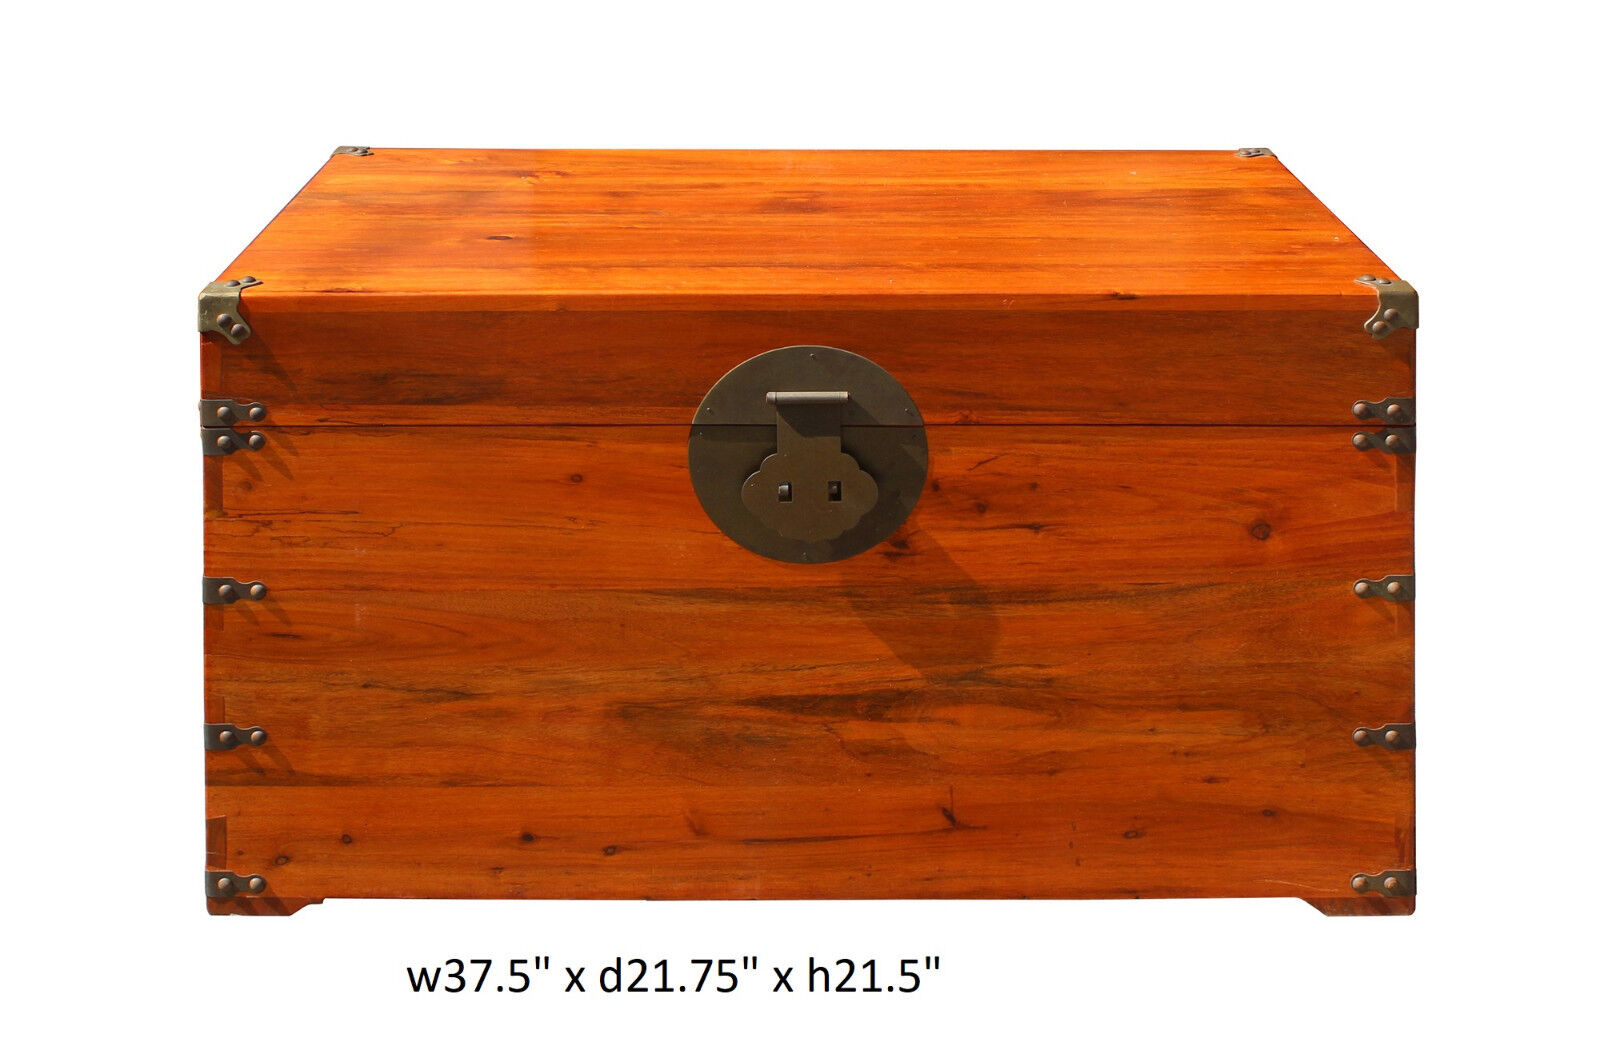 Oriental Chinese Brown Wood Moon Face Hardware Trunk Table cs3160 Handmade Does Not Apply - фотография #7